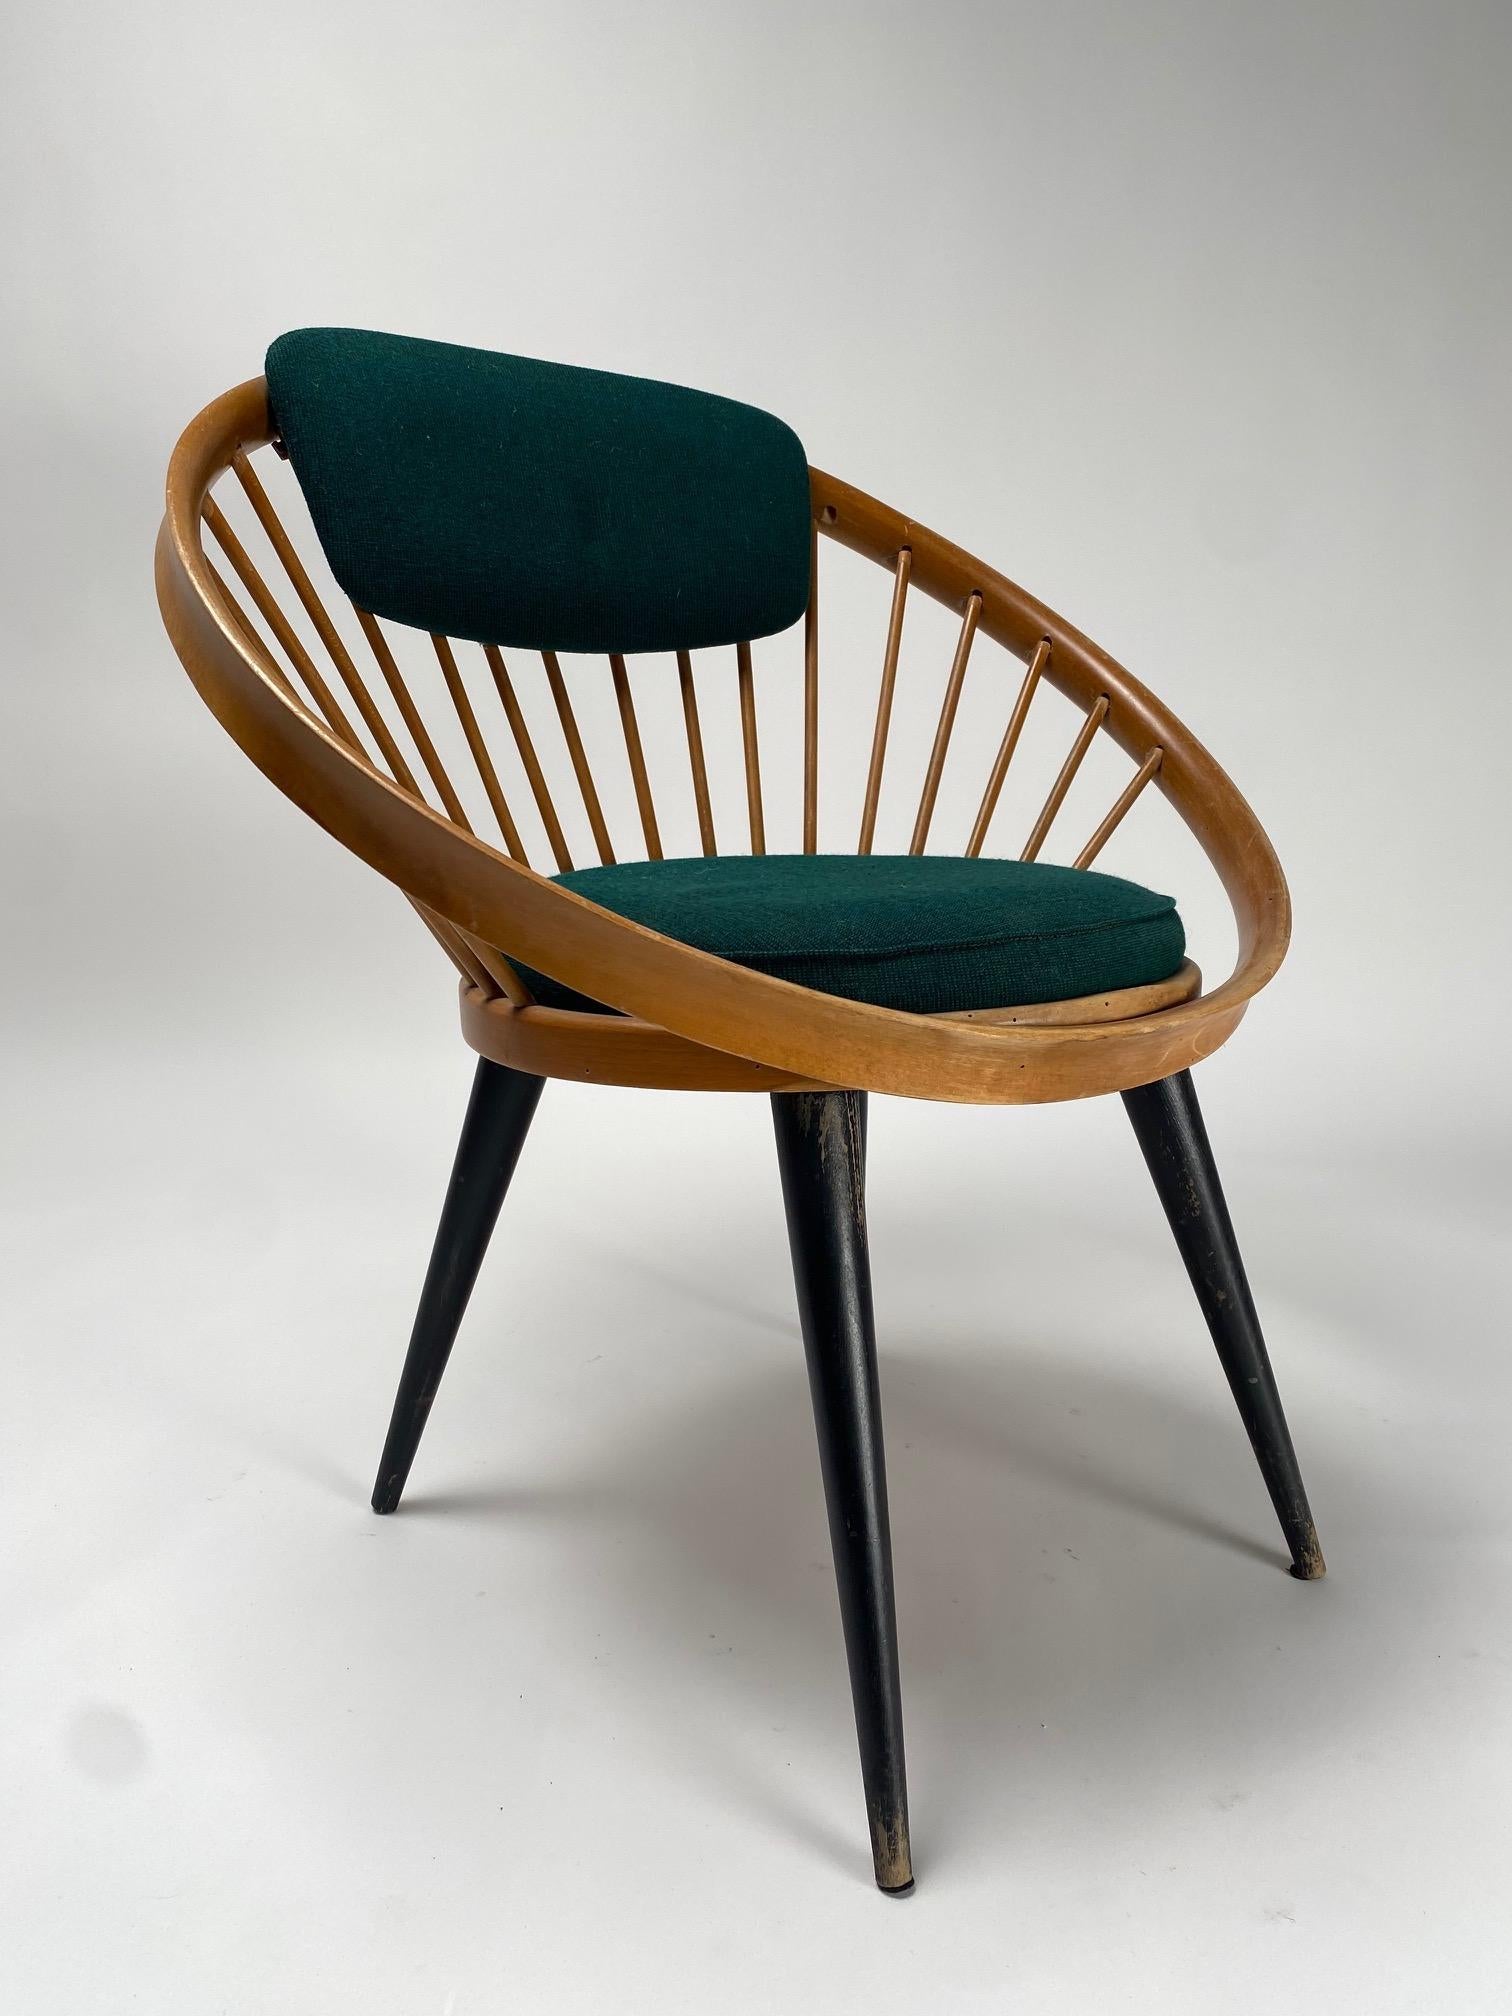 It is one of the most iconic and representative chairs of Swedish design, designed by Yngve Ekström and produced in the 1960s for Swedese, Sweden.

  With colleagues such as Aalto, Mathsson, Jacobsen and Kjaerholm, Yngve Ekström was part of the